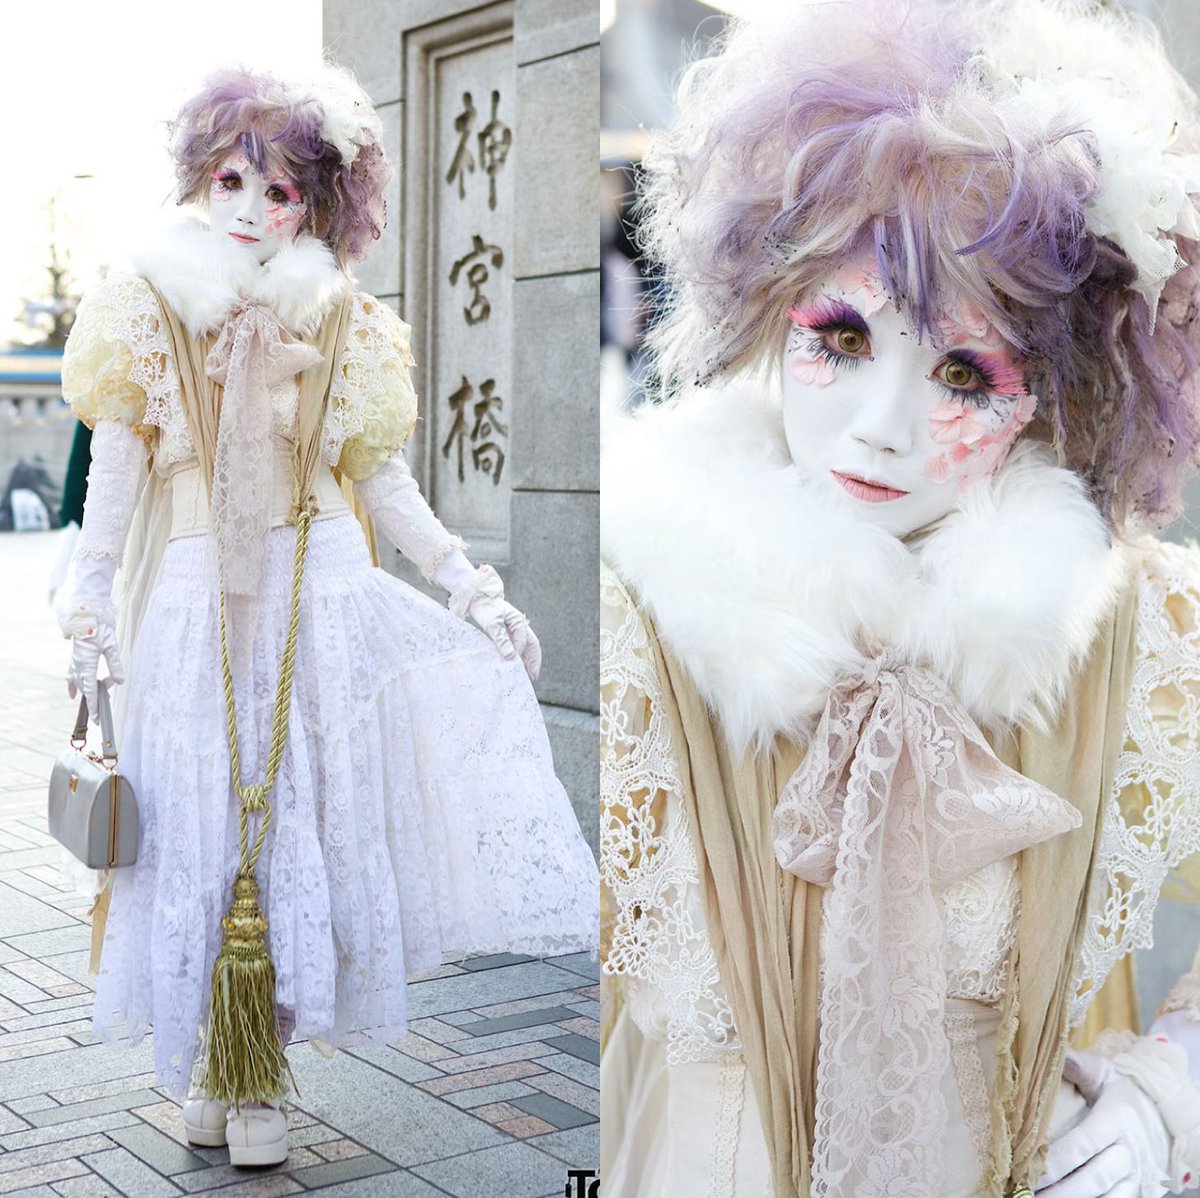 Purple and white lace.
The makeup is different from now and it's nostalgic!

Photo @TokyoFashion